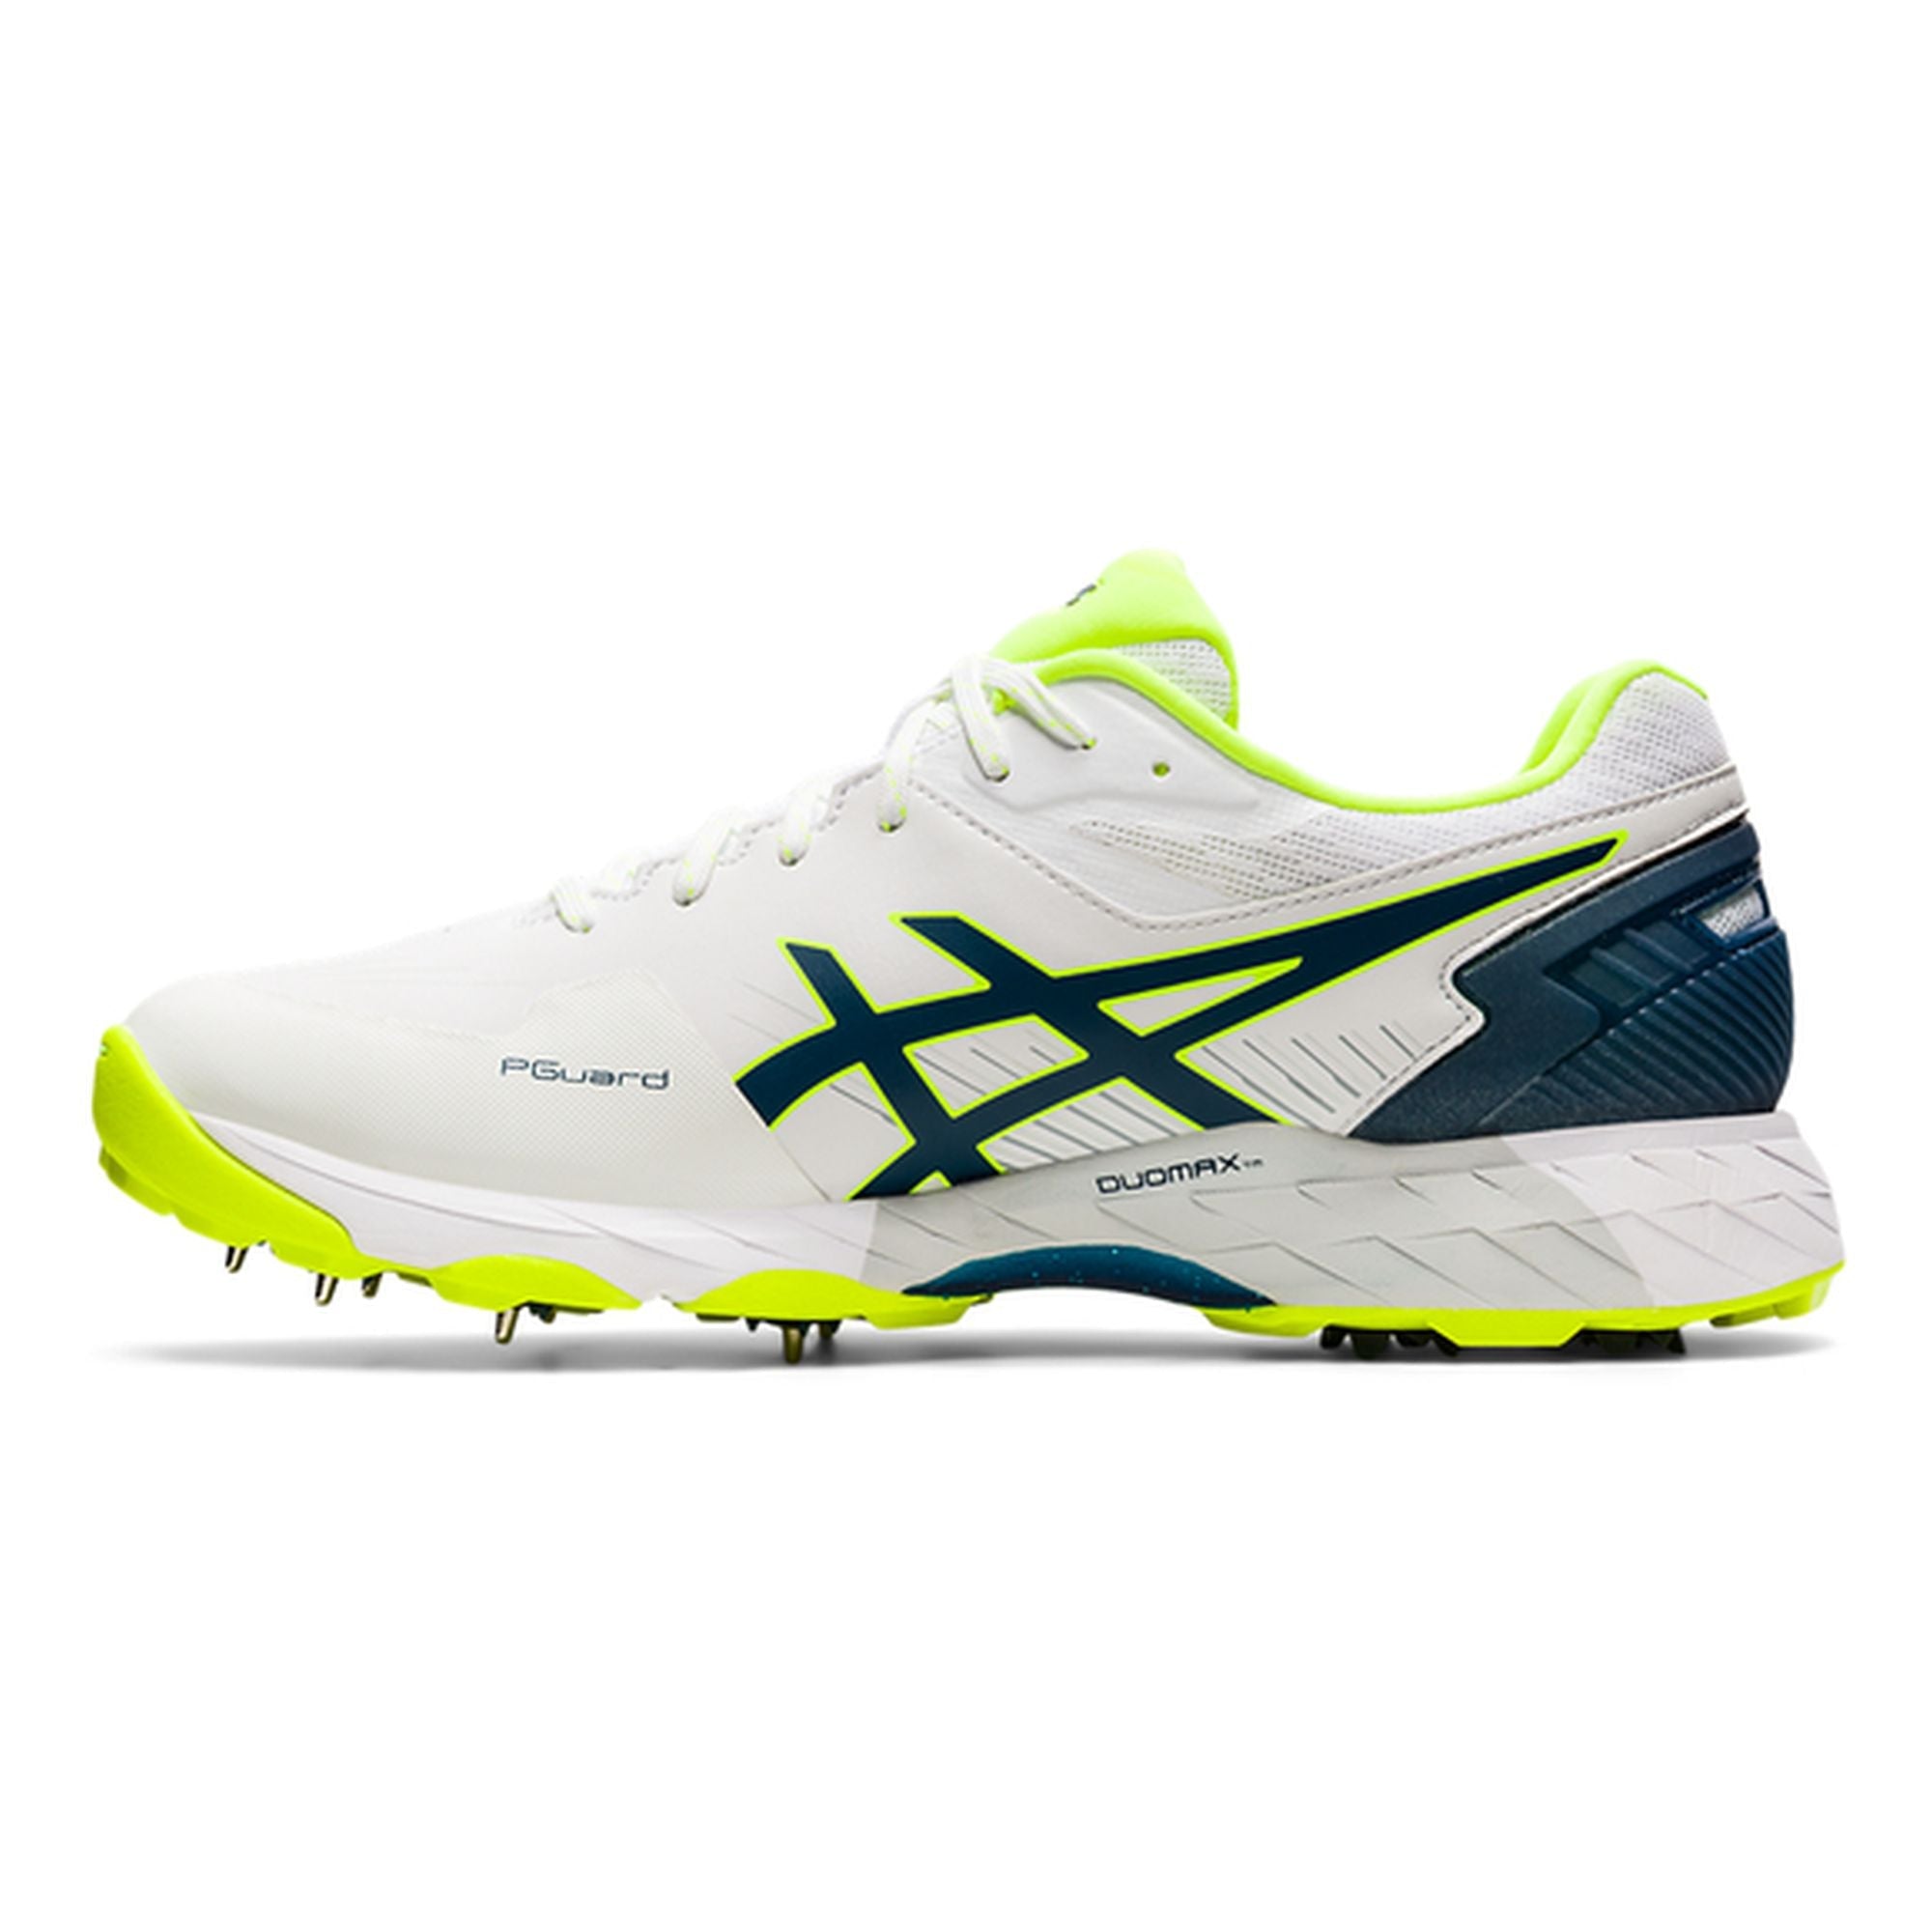 Asics Gel 350 Not Out Cricket Spikes Blue/Yellow - The Cricket Warehouse